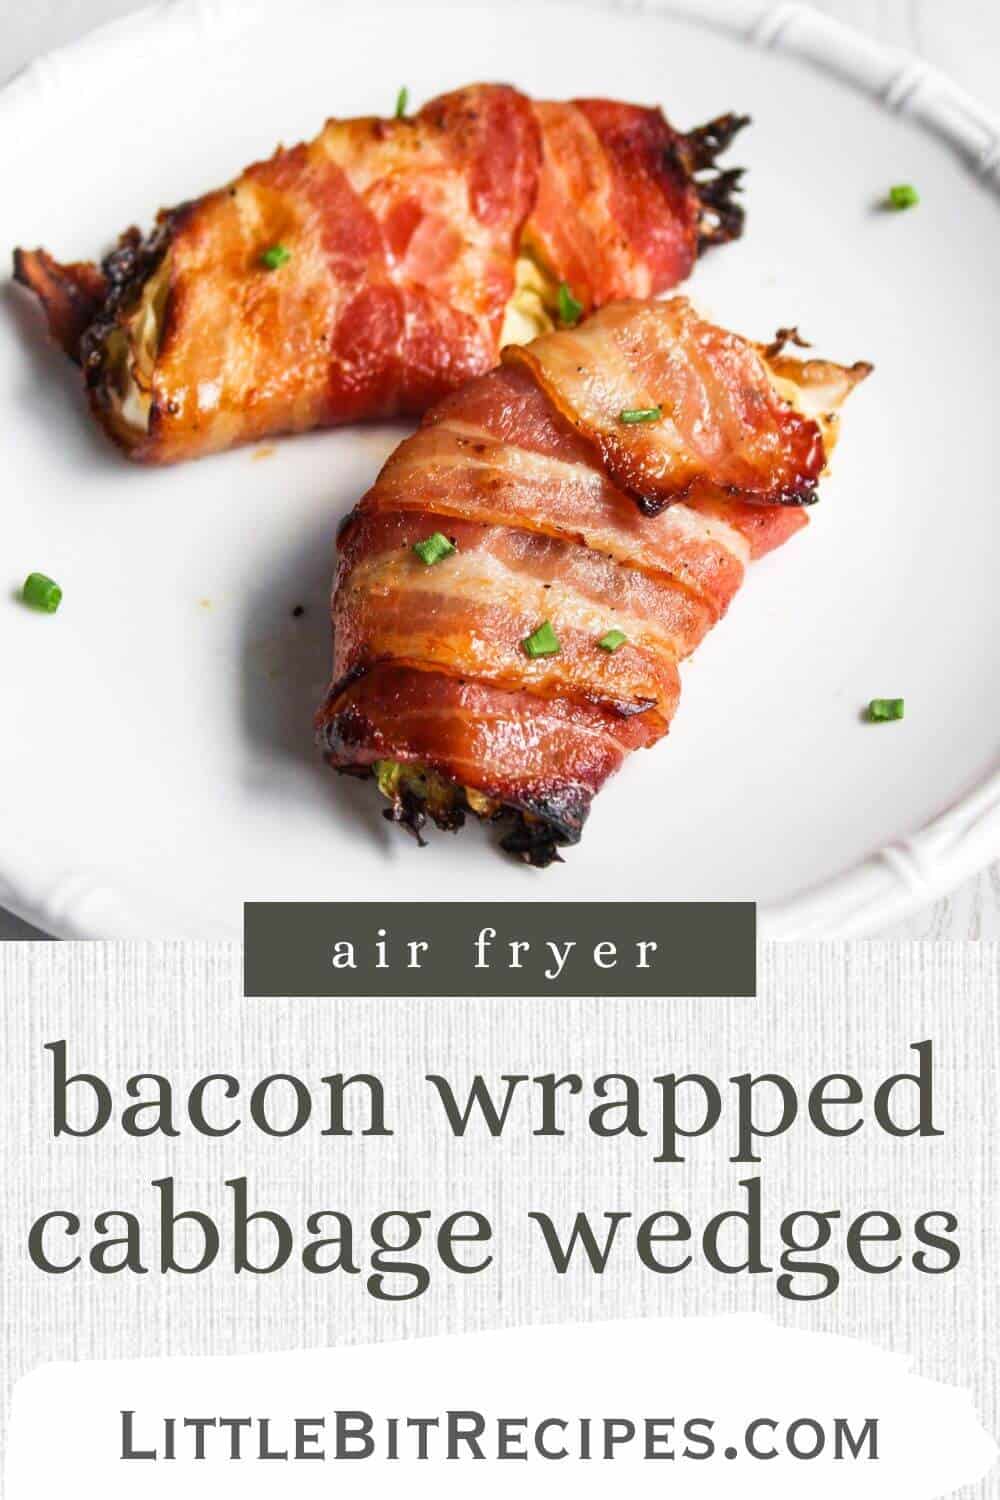 Bacon wrapped air fryer cabbage wedges with text.